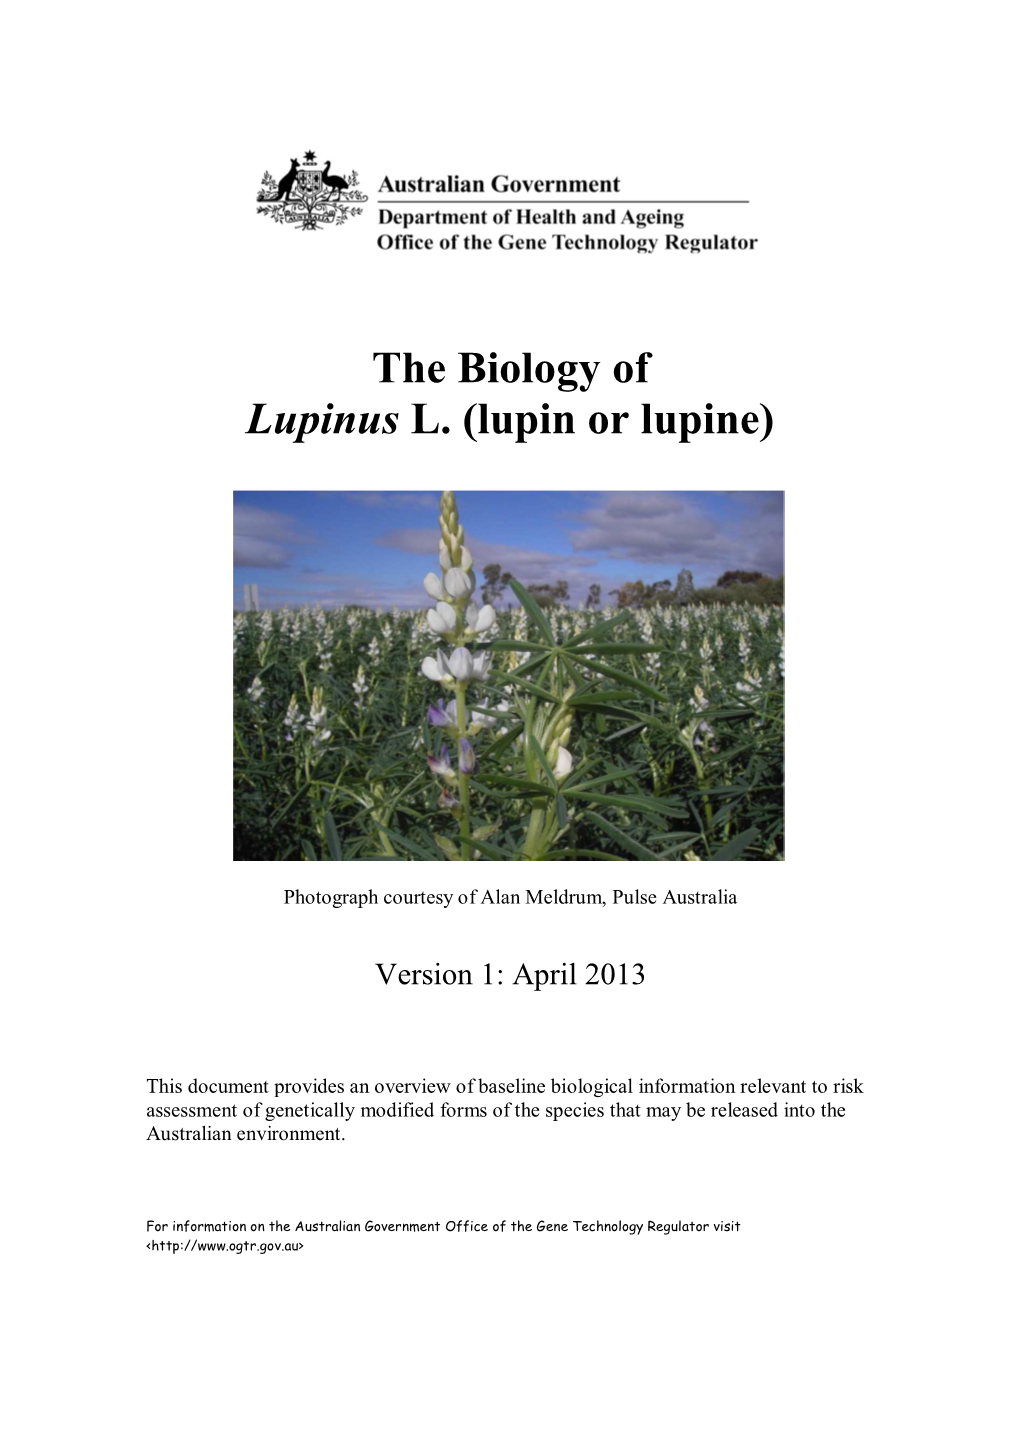 The Biology of Lupinus L. (Lupin Or Lupine)